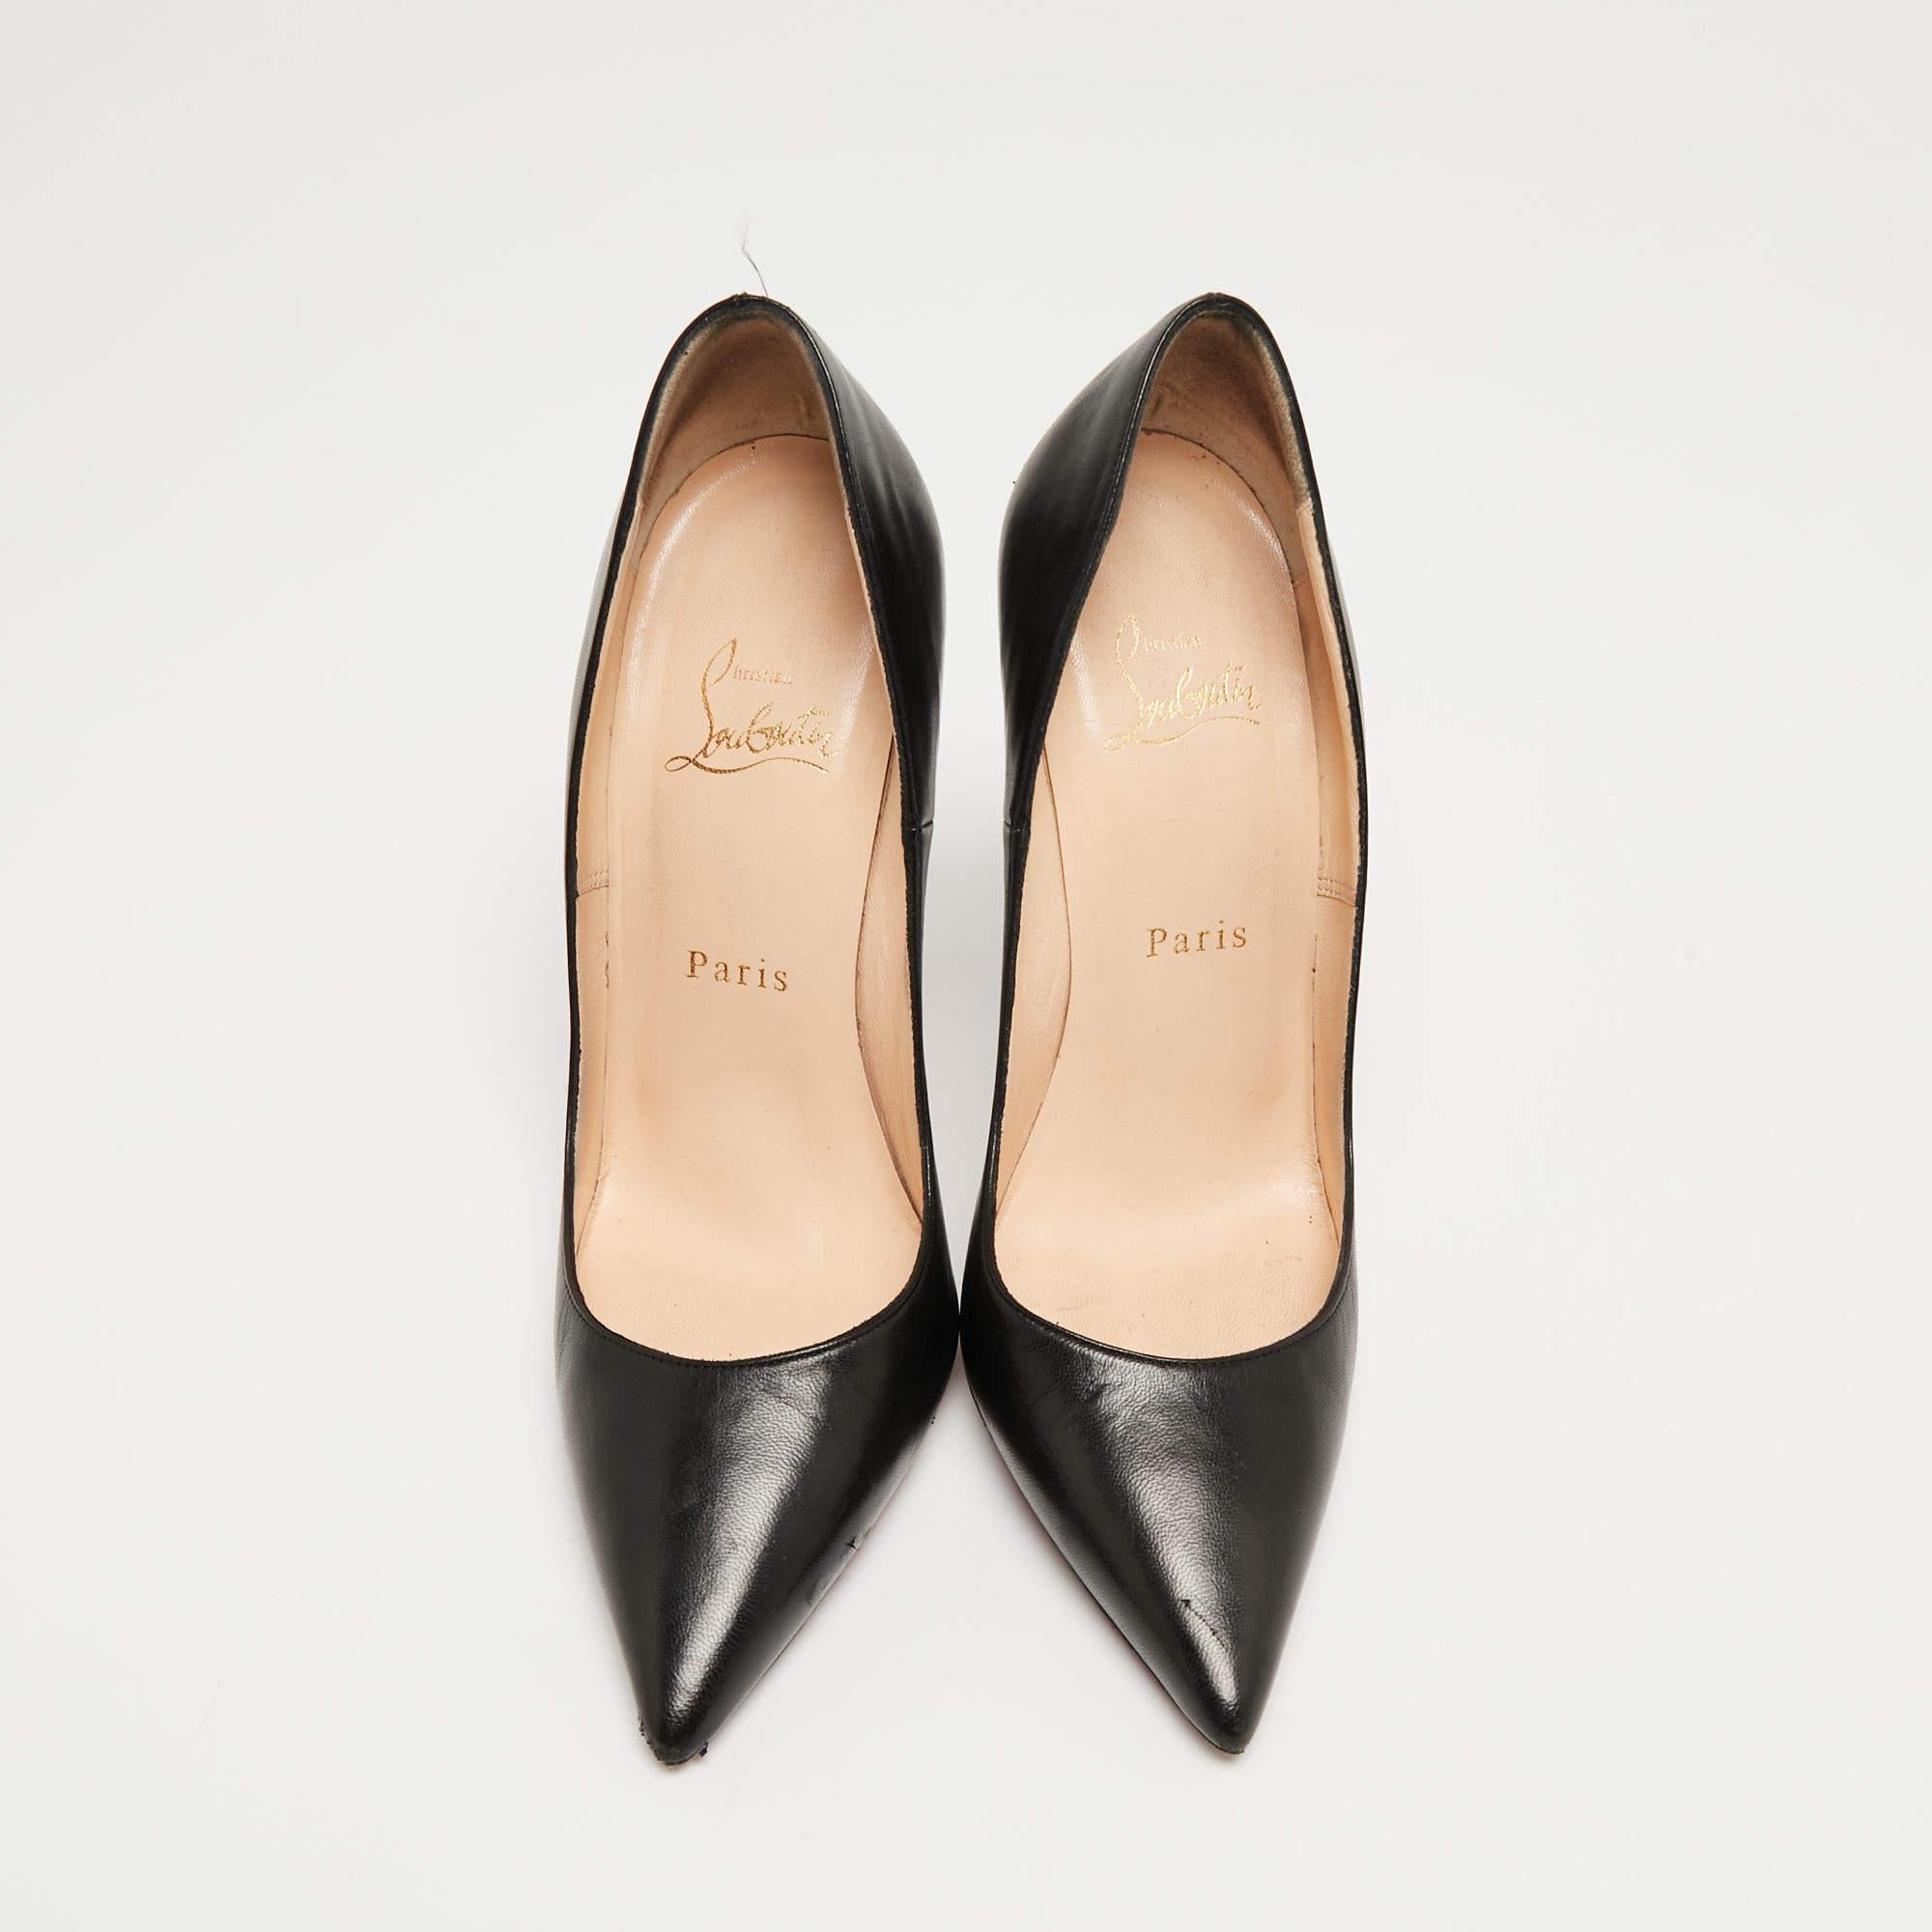 Christian Louboutin Black Leather So Kate Pumps Size 38 For Sale 2